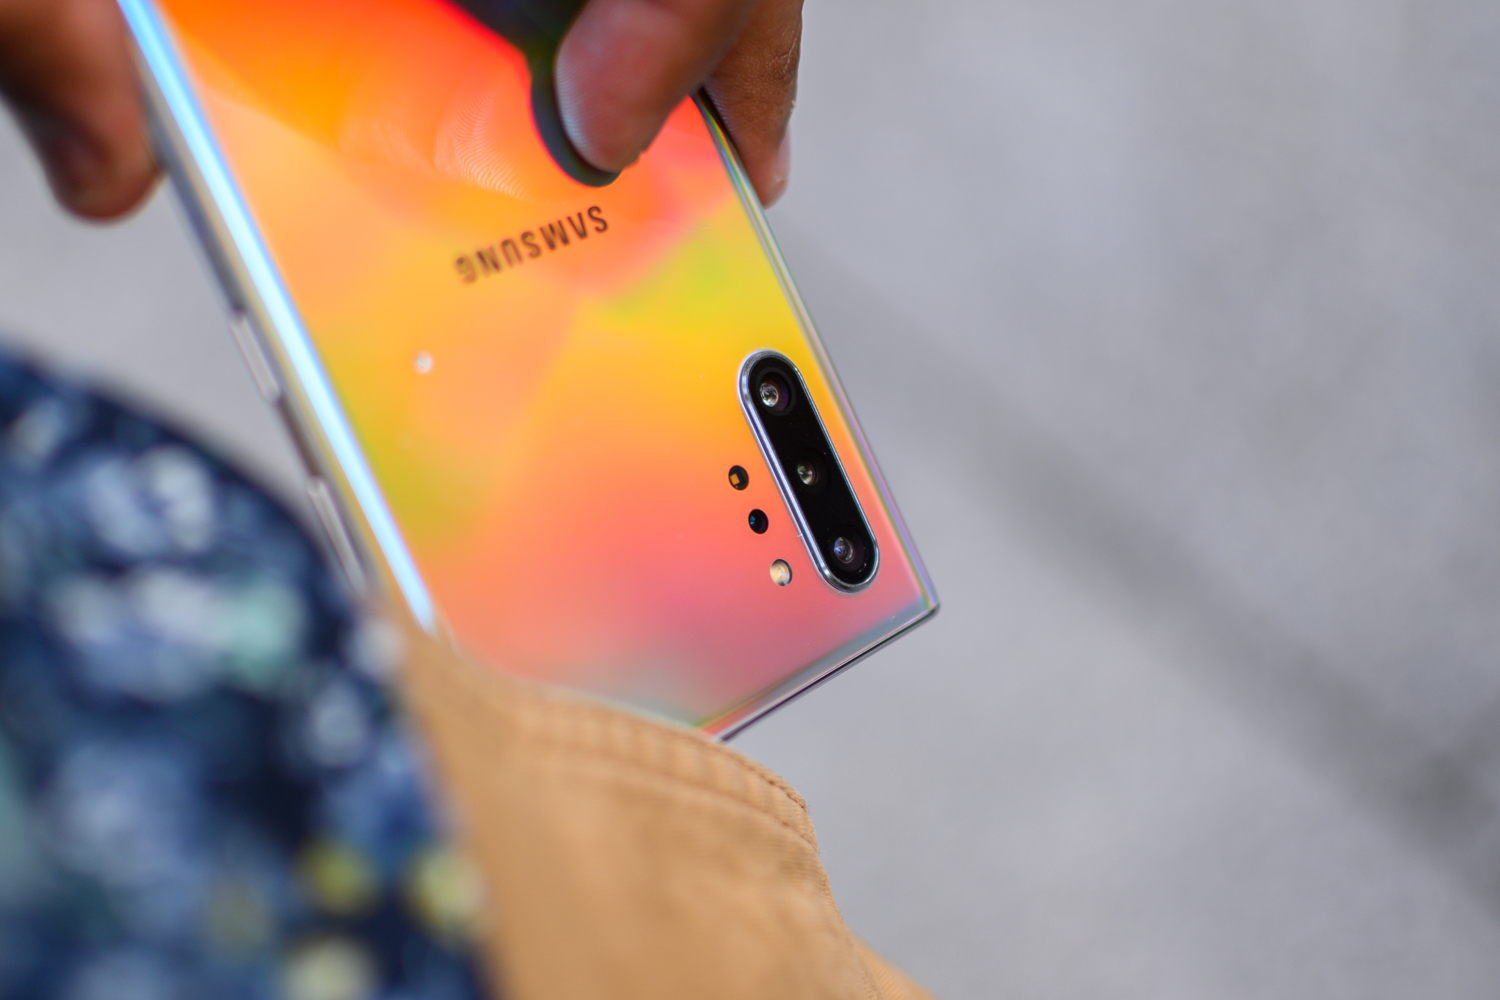 Samsung Galaxy Note 10+: Slick, Buttery Smooth & Still Feels New